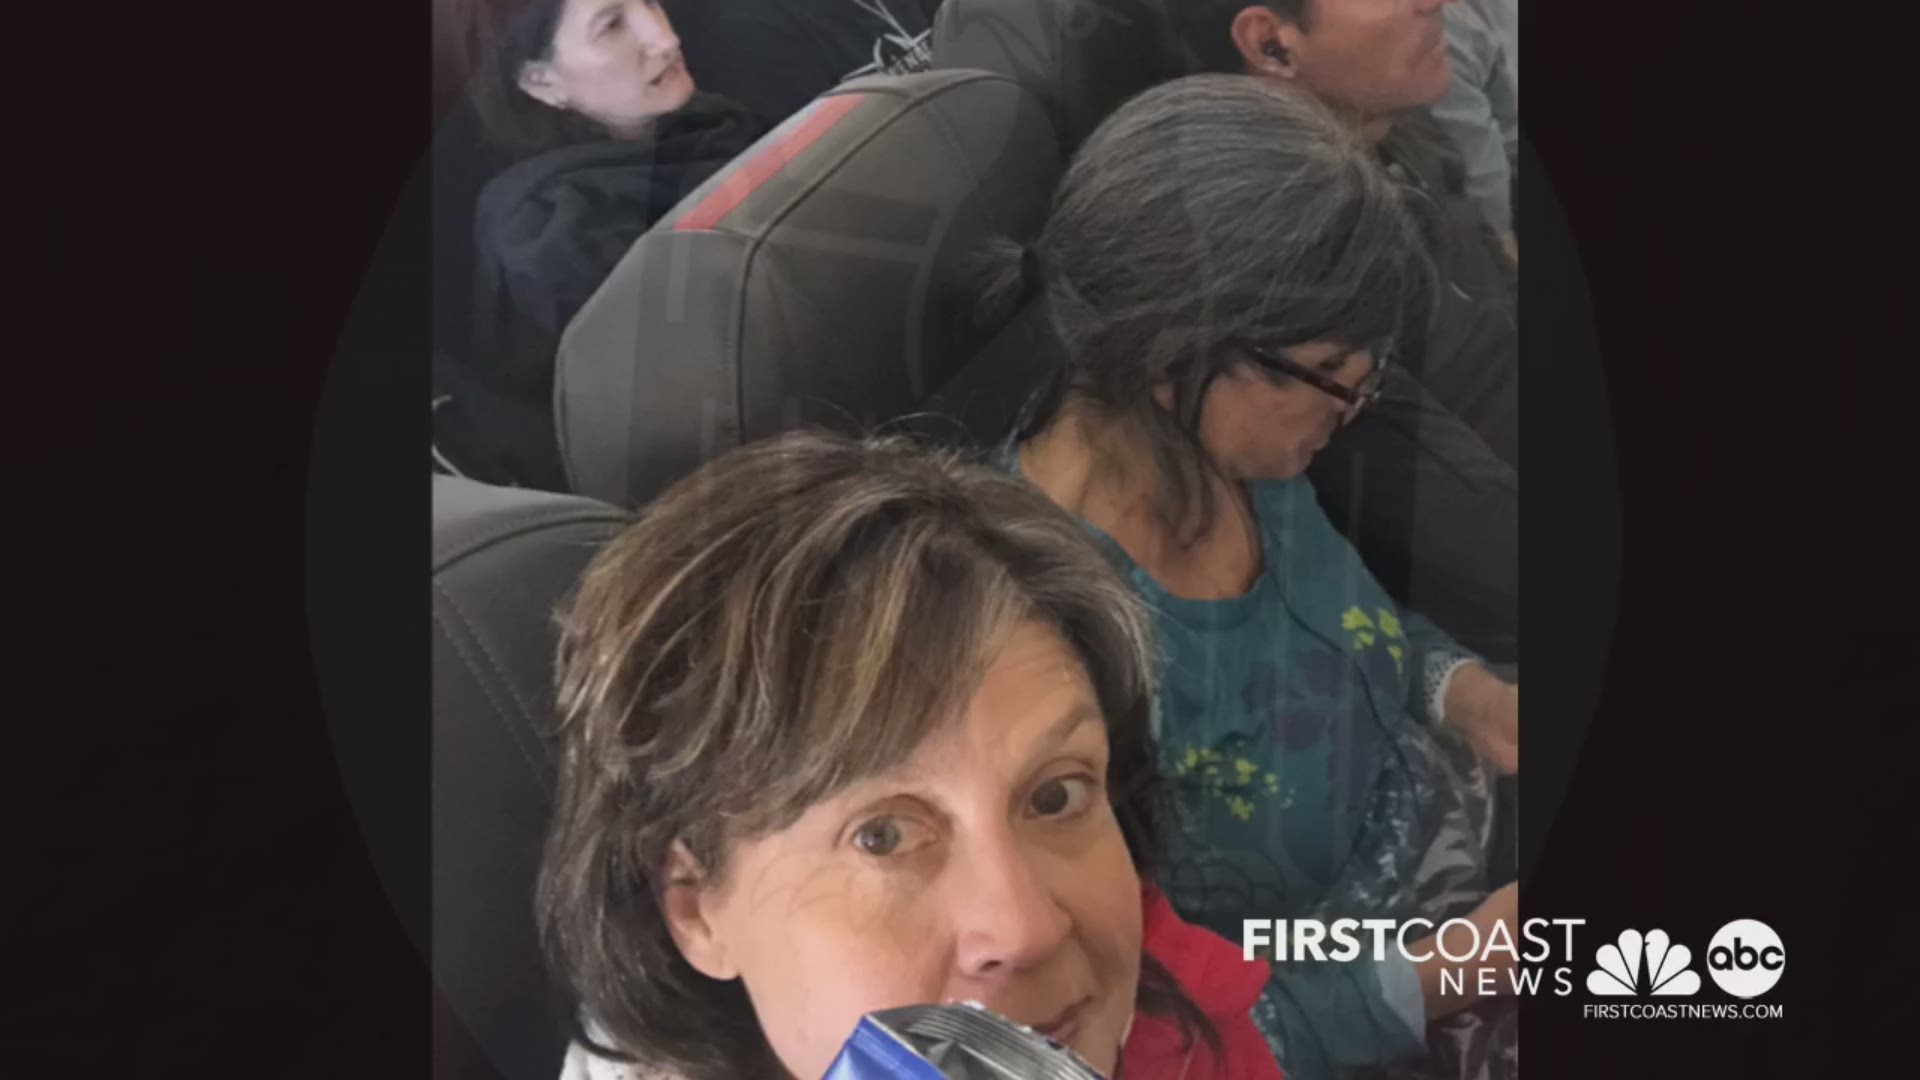 First Coast News' Jeannie Blaylock was flying back to the United States from Normandy when she saw a 96-year-old D-Day veteran get the star treatment from travelers and crew.